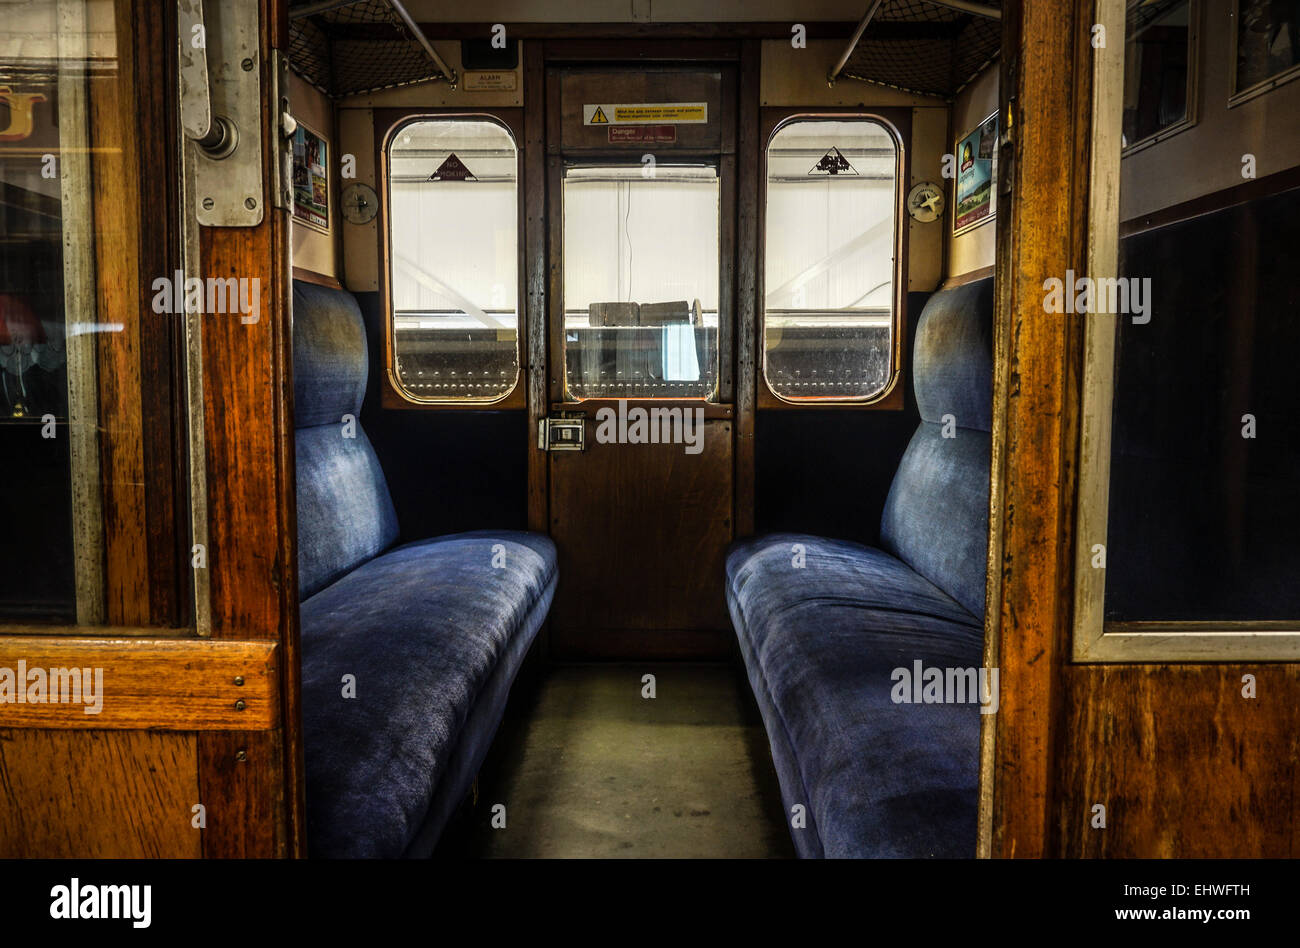 Old British railway carriage compartment interior view. Taken at Oxenhope railway depot, England, Aug 2014 Stock Photo